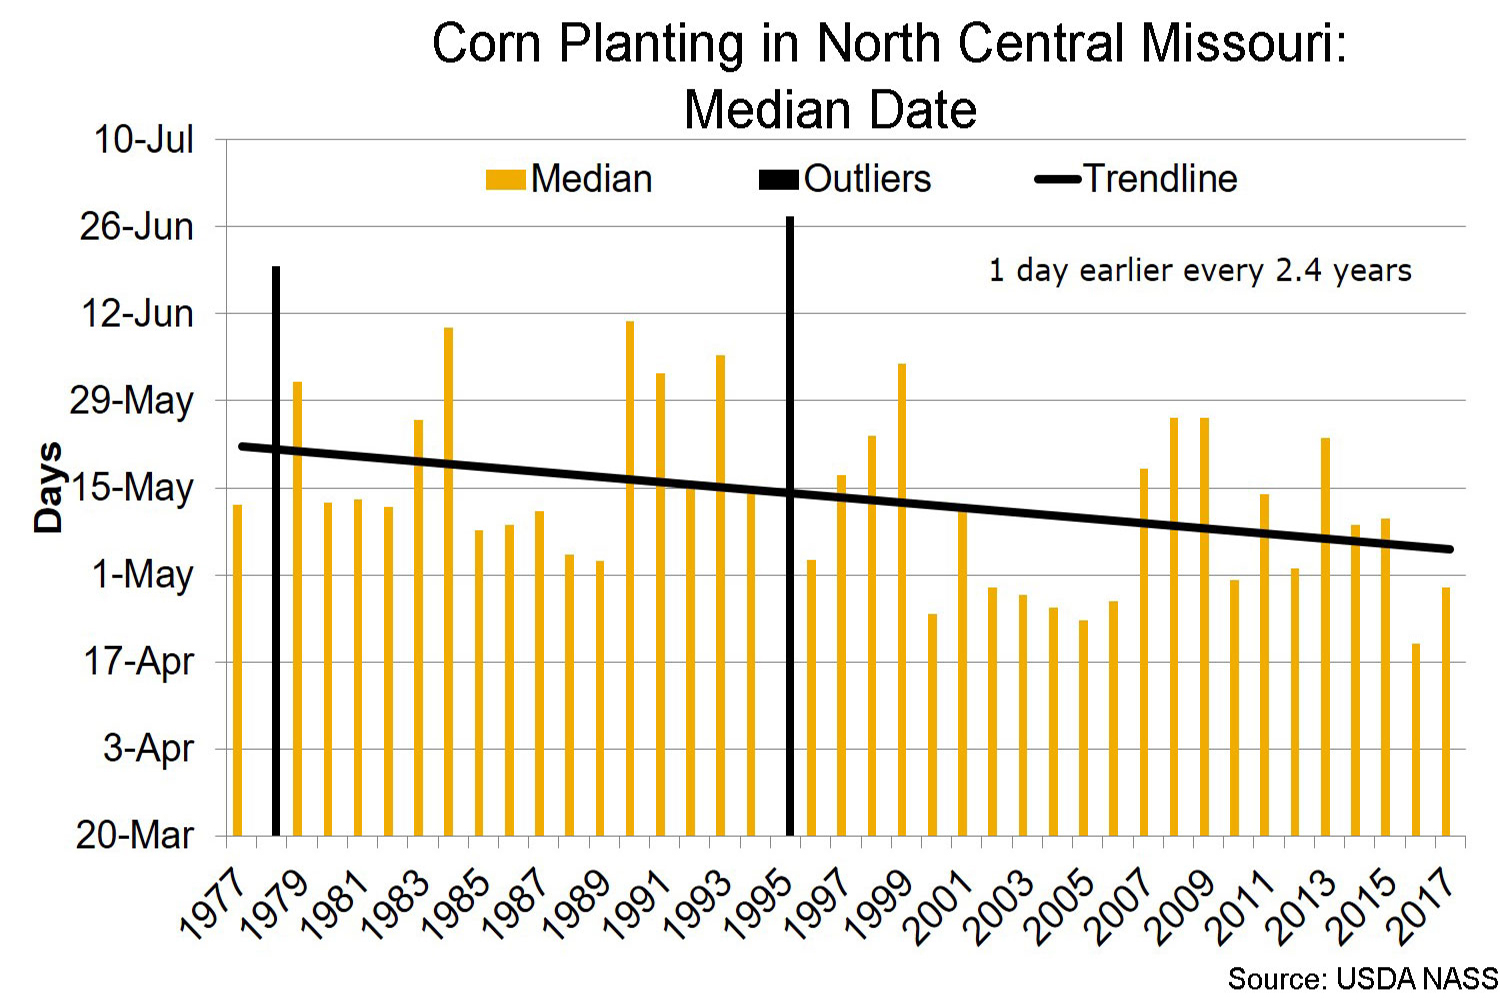 Corn planting in north central Missouri median date chart